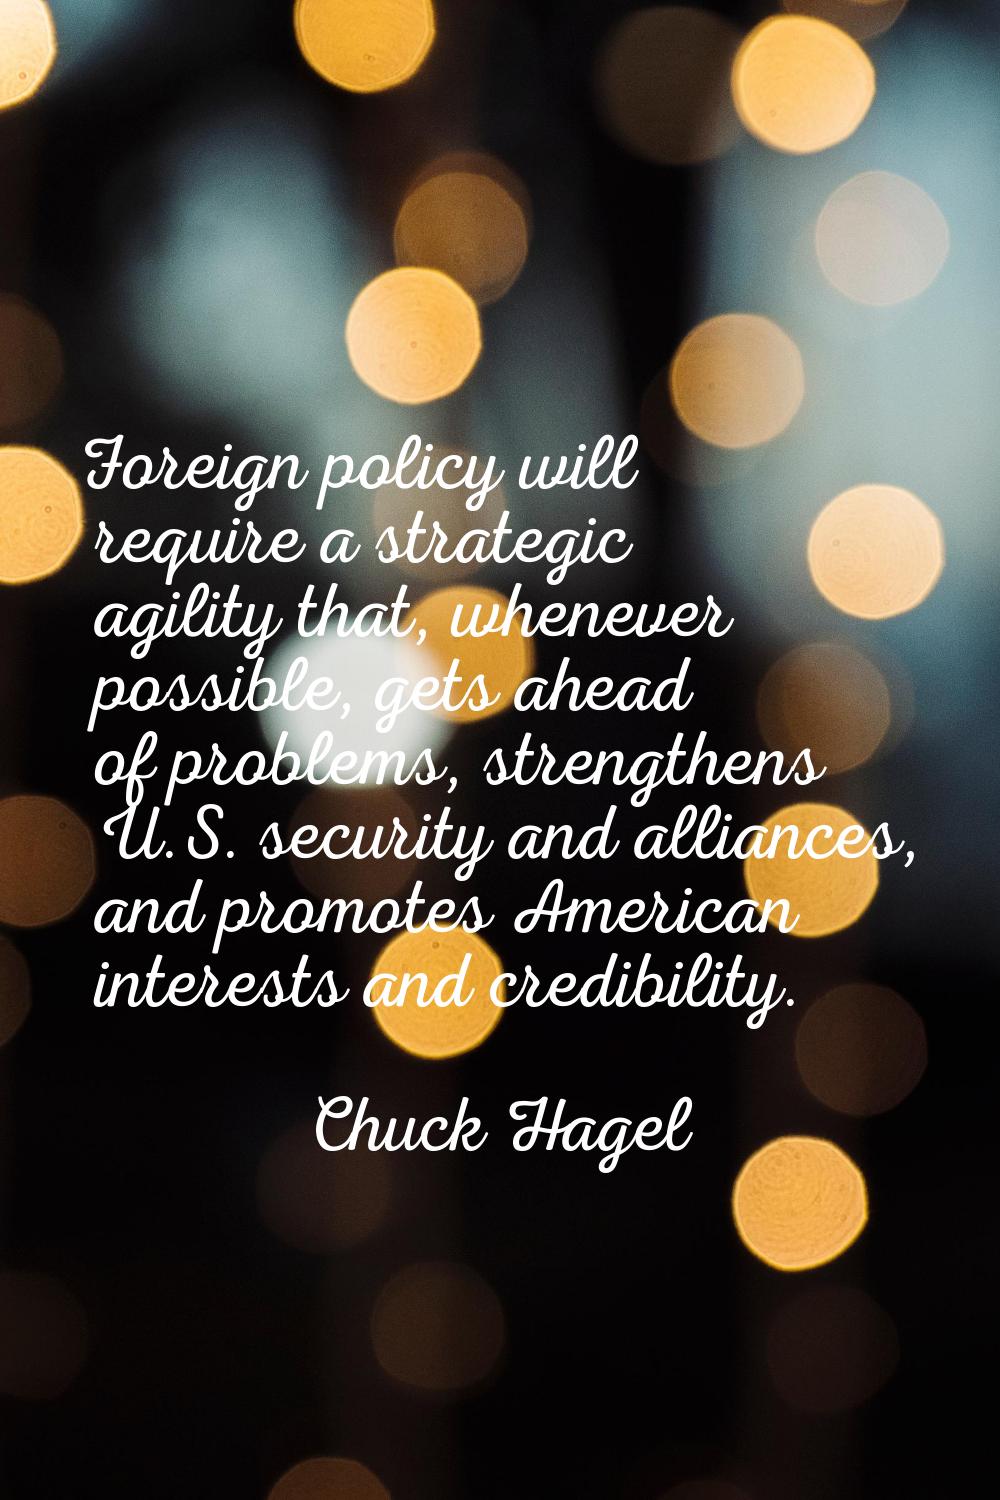 Foreign policy will require a strategic agility that, whenever possible, gets ahead of problems, st